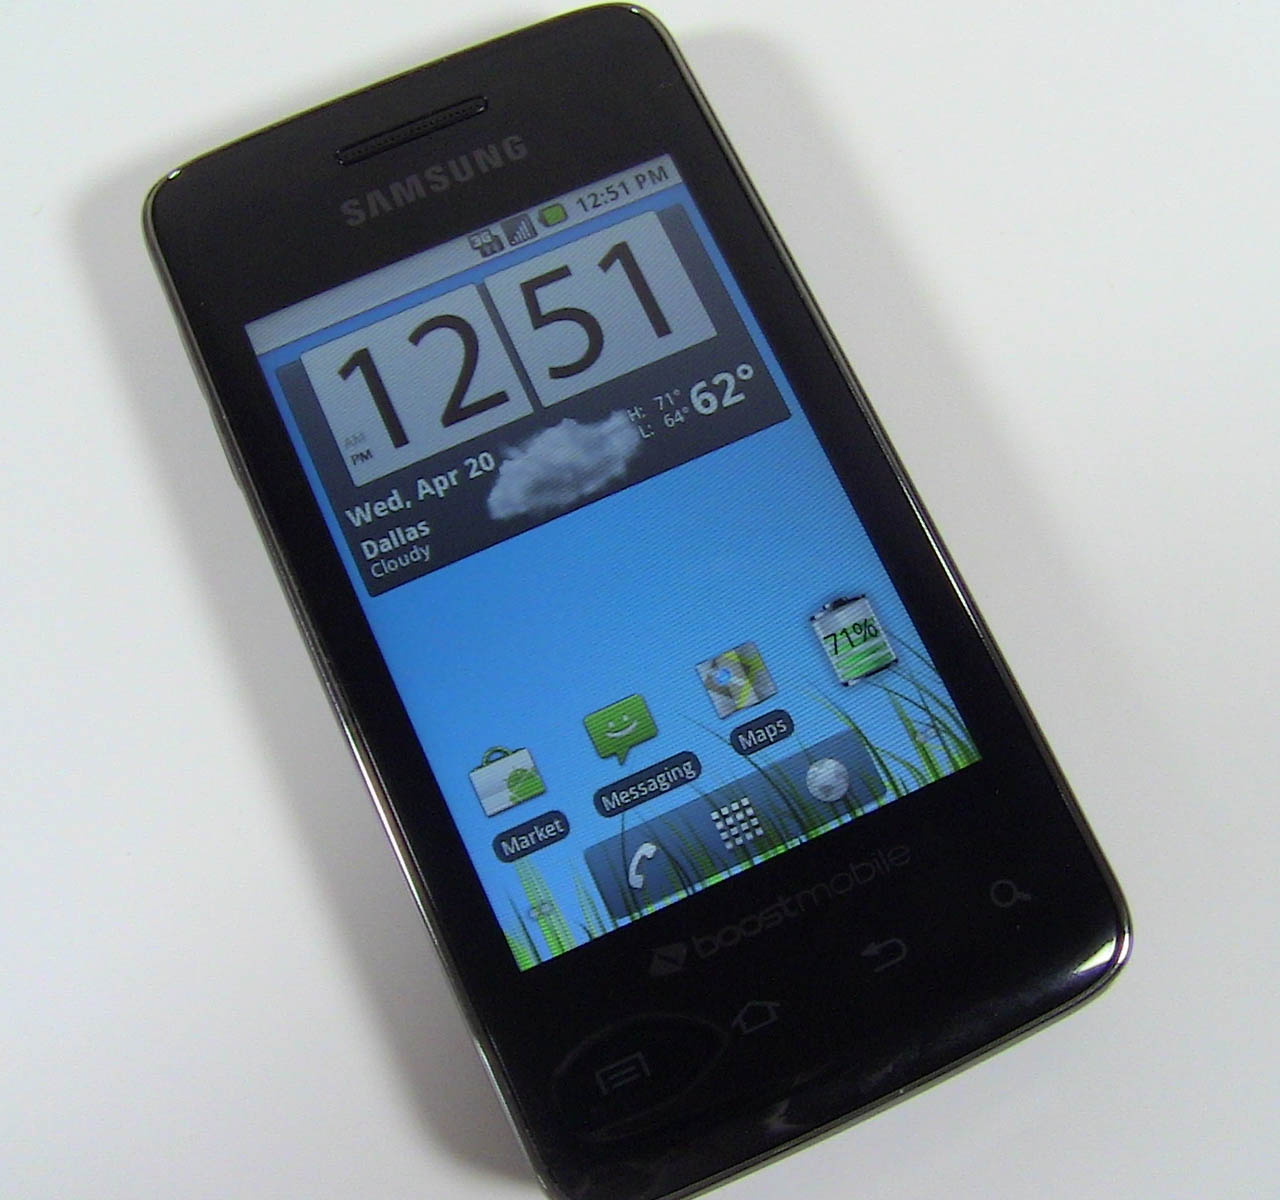 Samsung Galaxy Prevail Review by Sydney   PhoneDog